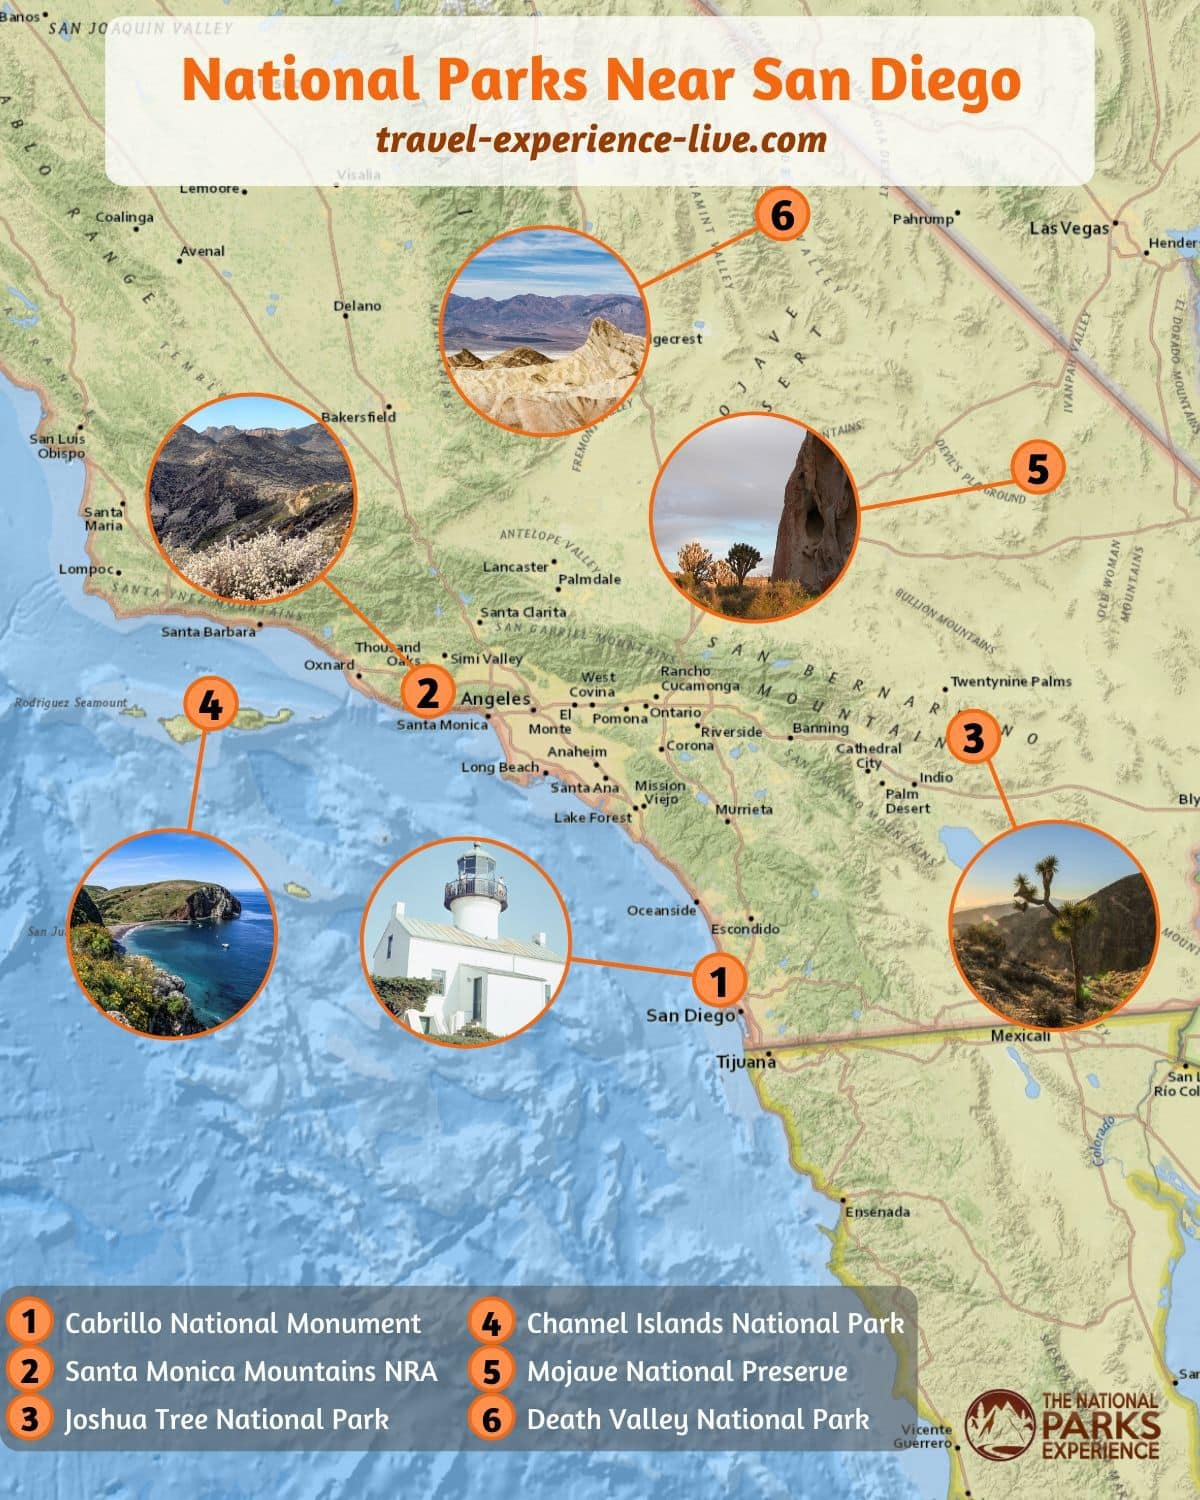 San Diego National Parks and Monuments Map